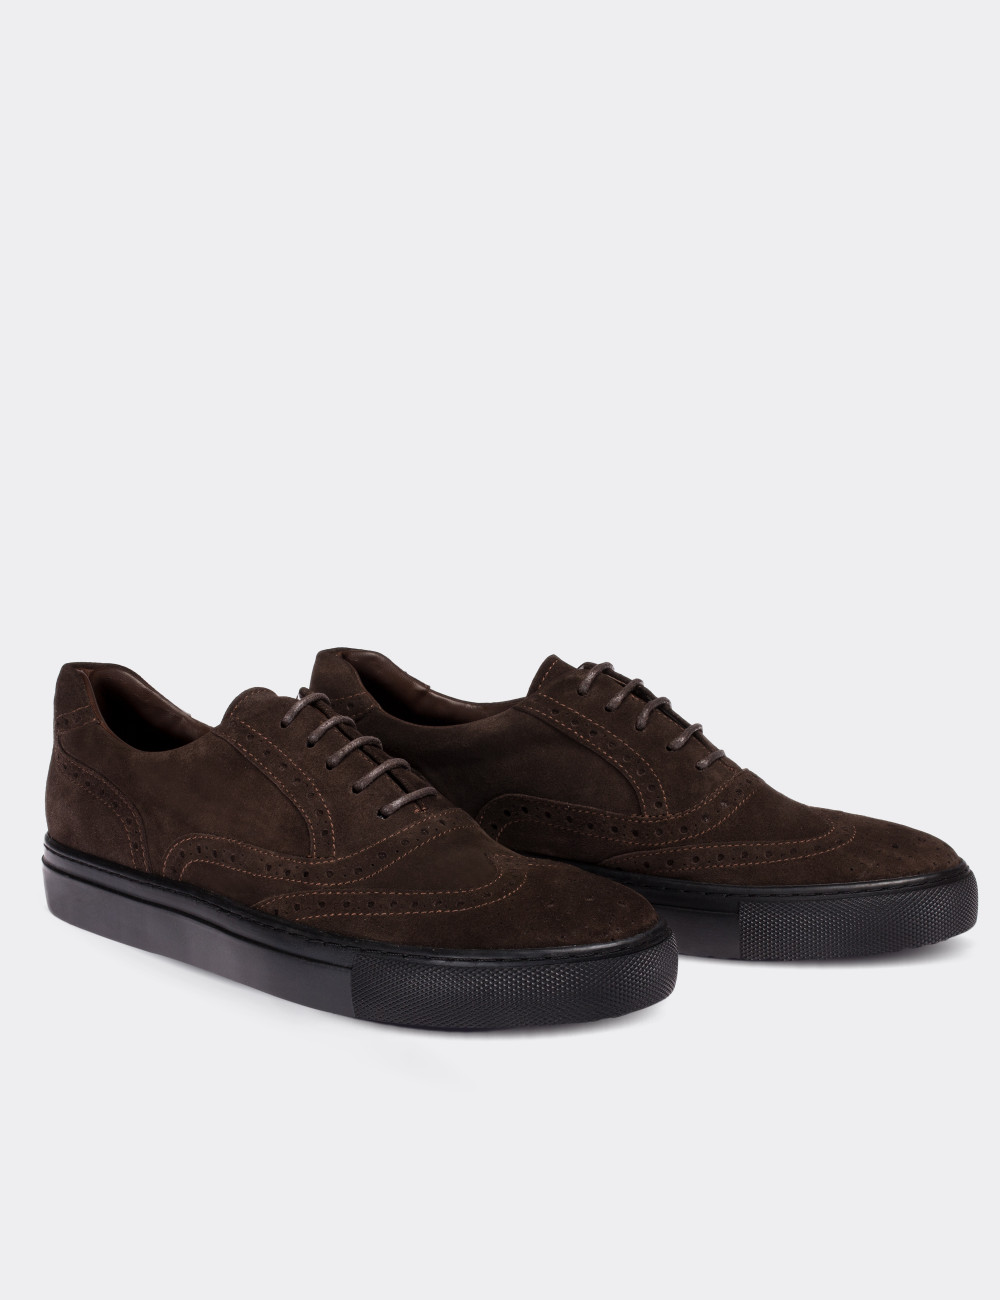 Brown Suede Leather Sneakers - 01637MKHVC04